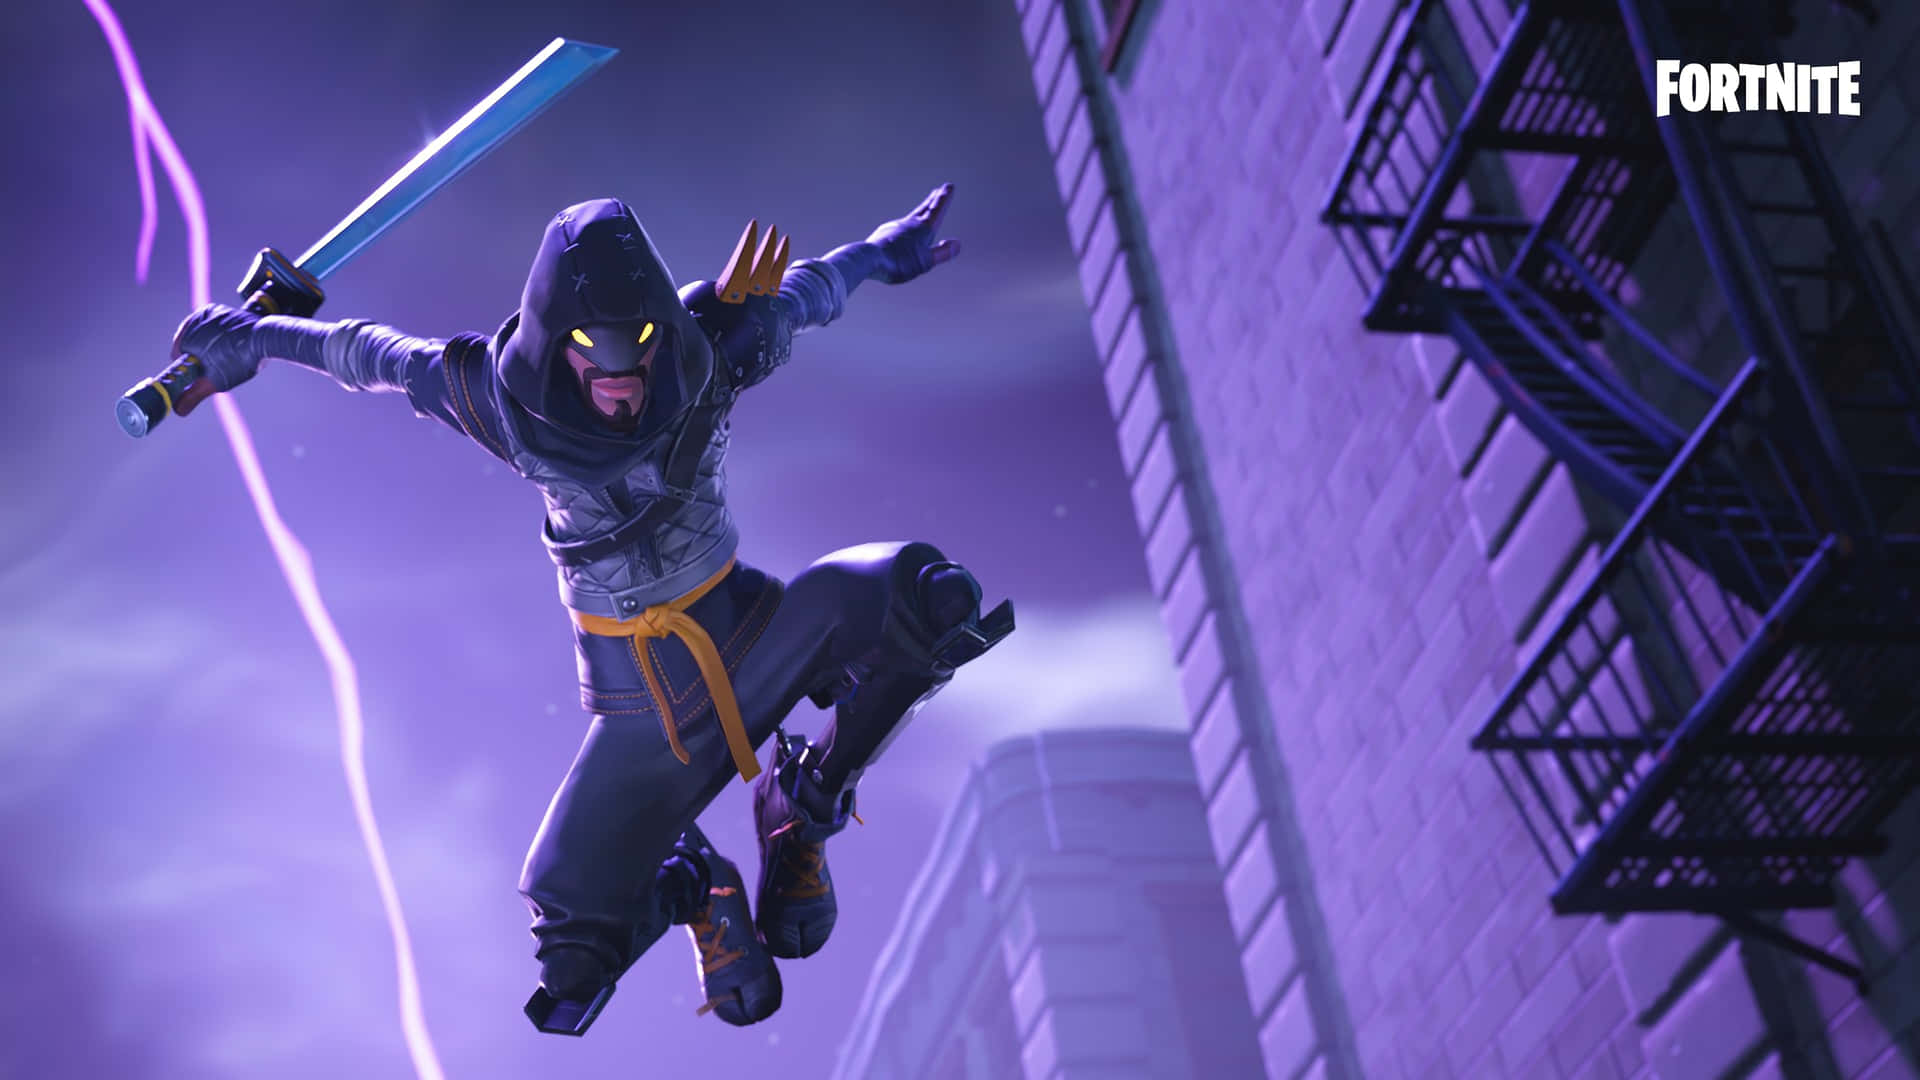 Take the Battle to New and Stylish Heights in Fortnite Purple Wallpaper